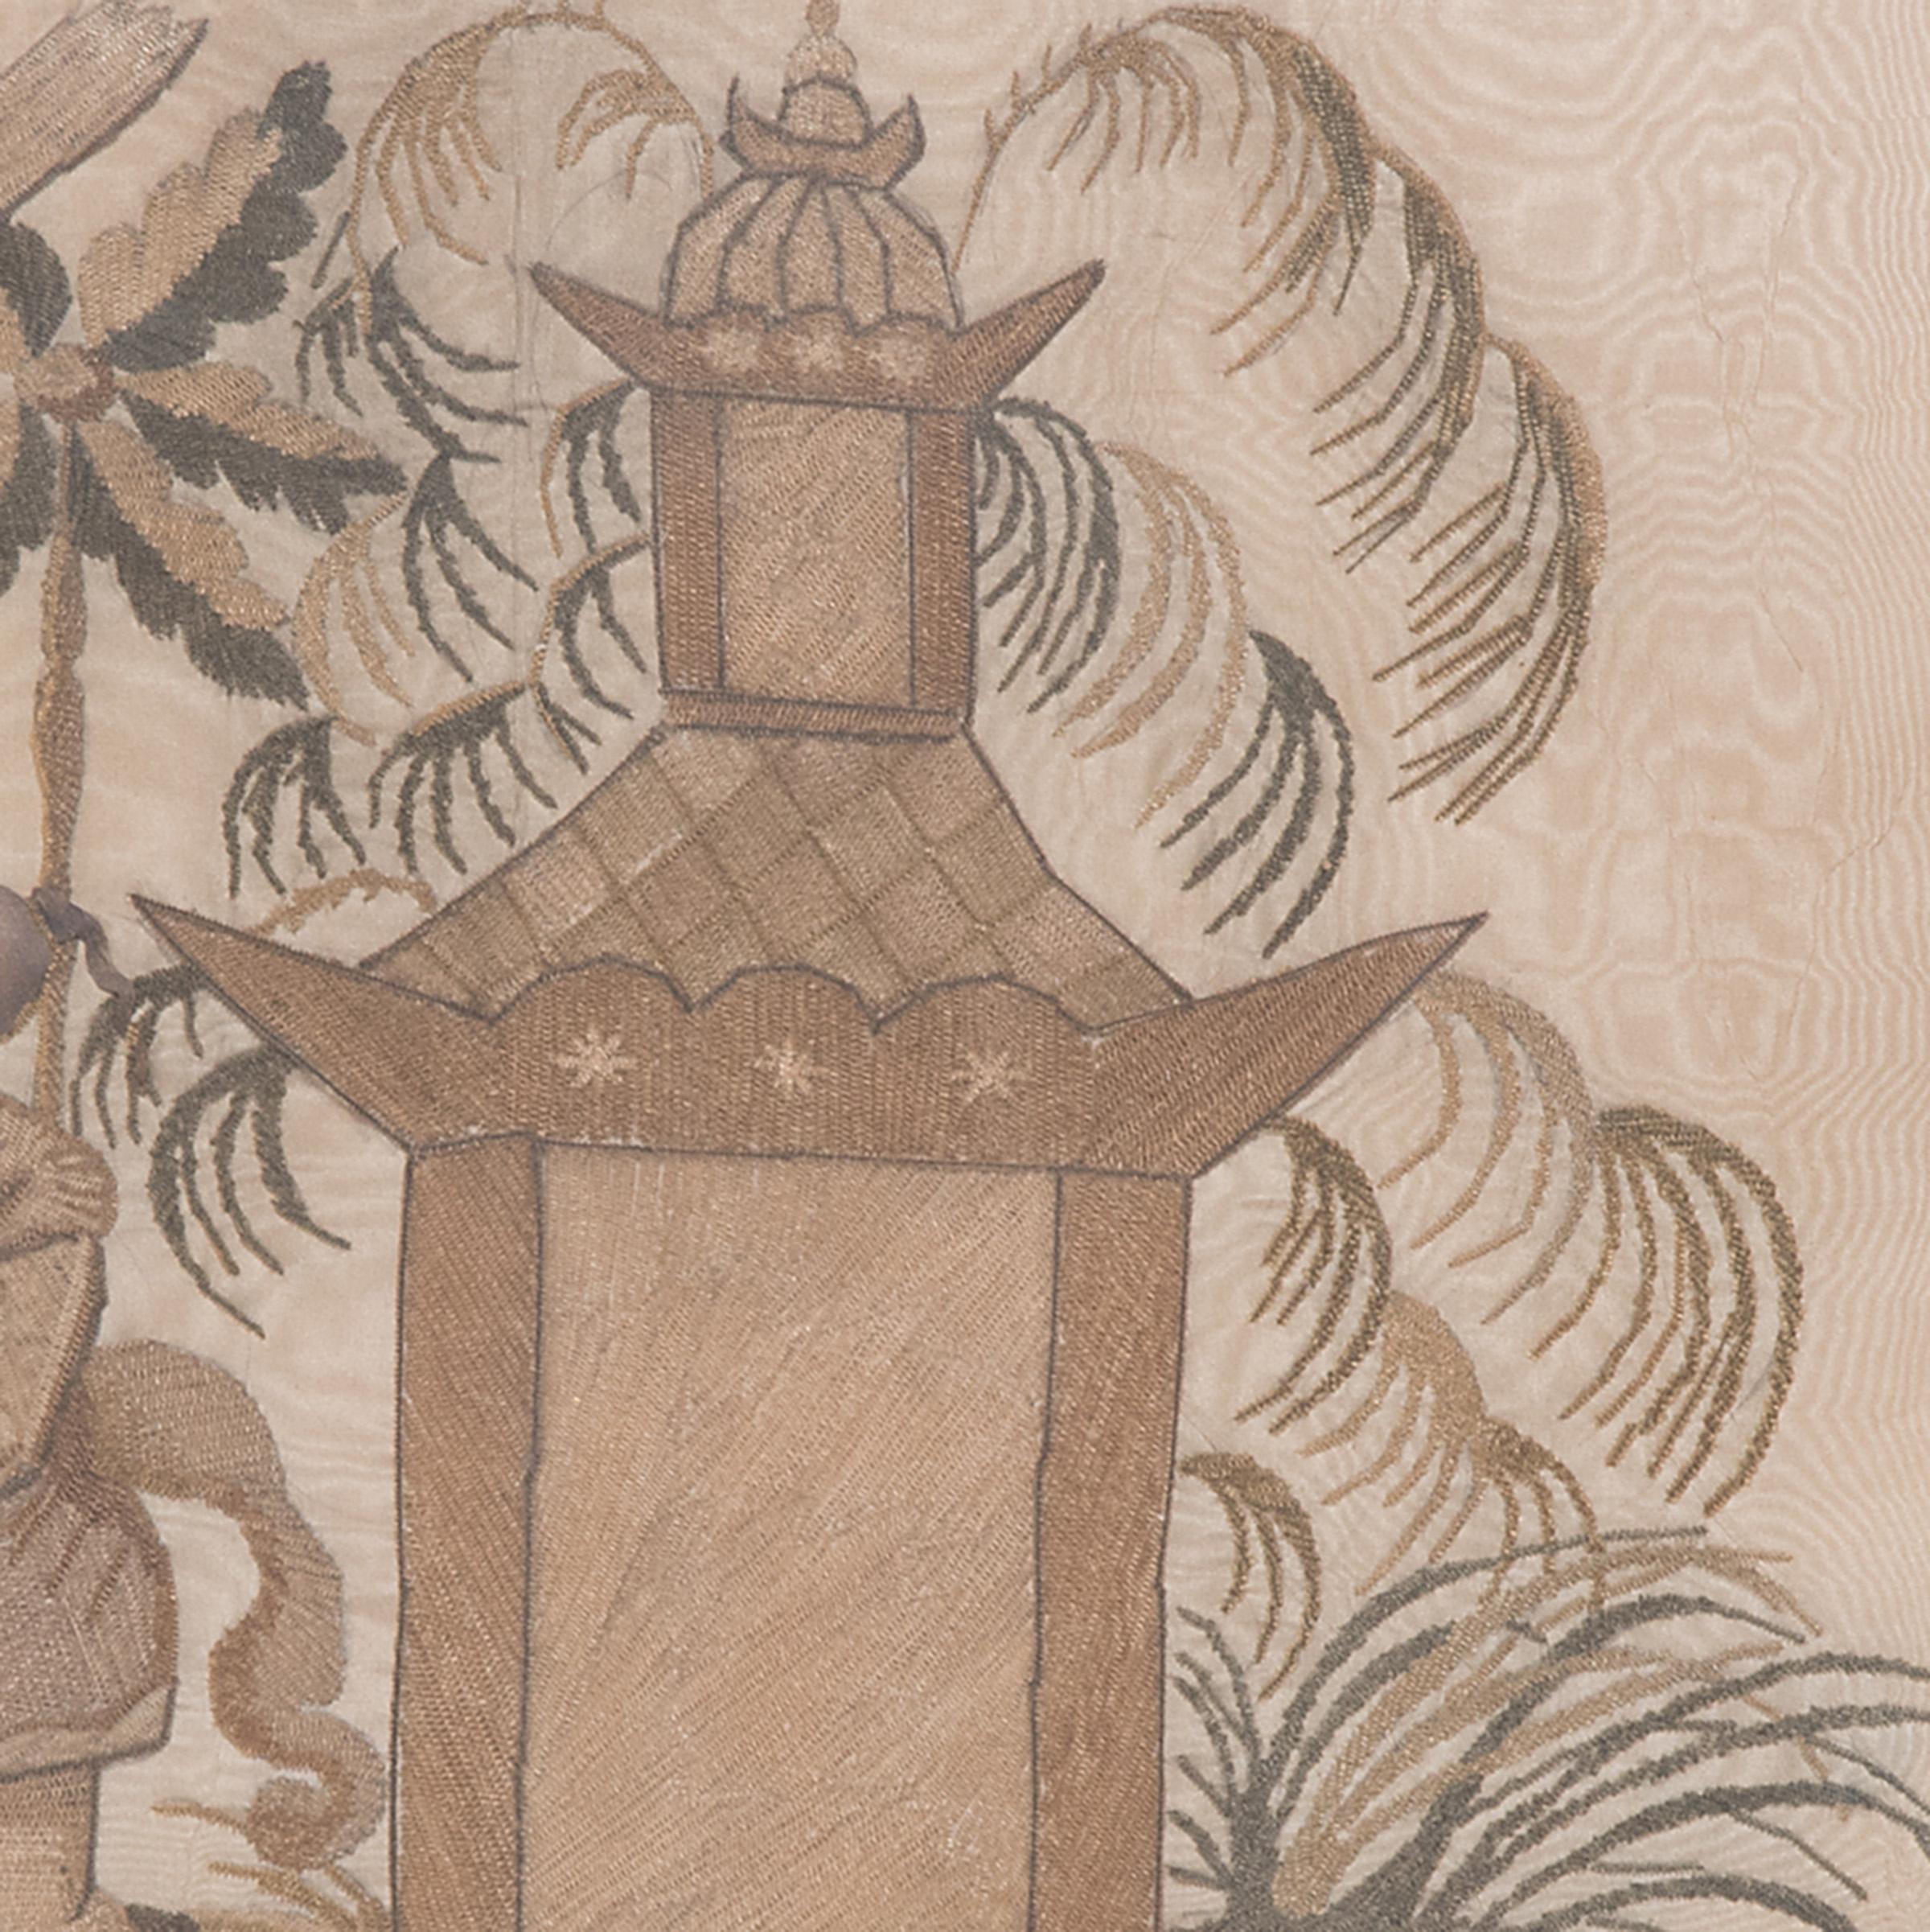 Chinoiserie European Pagoda & Phoenix Embroidery Fragment, c. 1900 For Sale